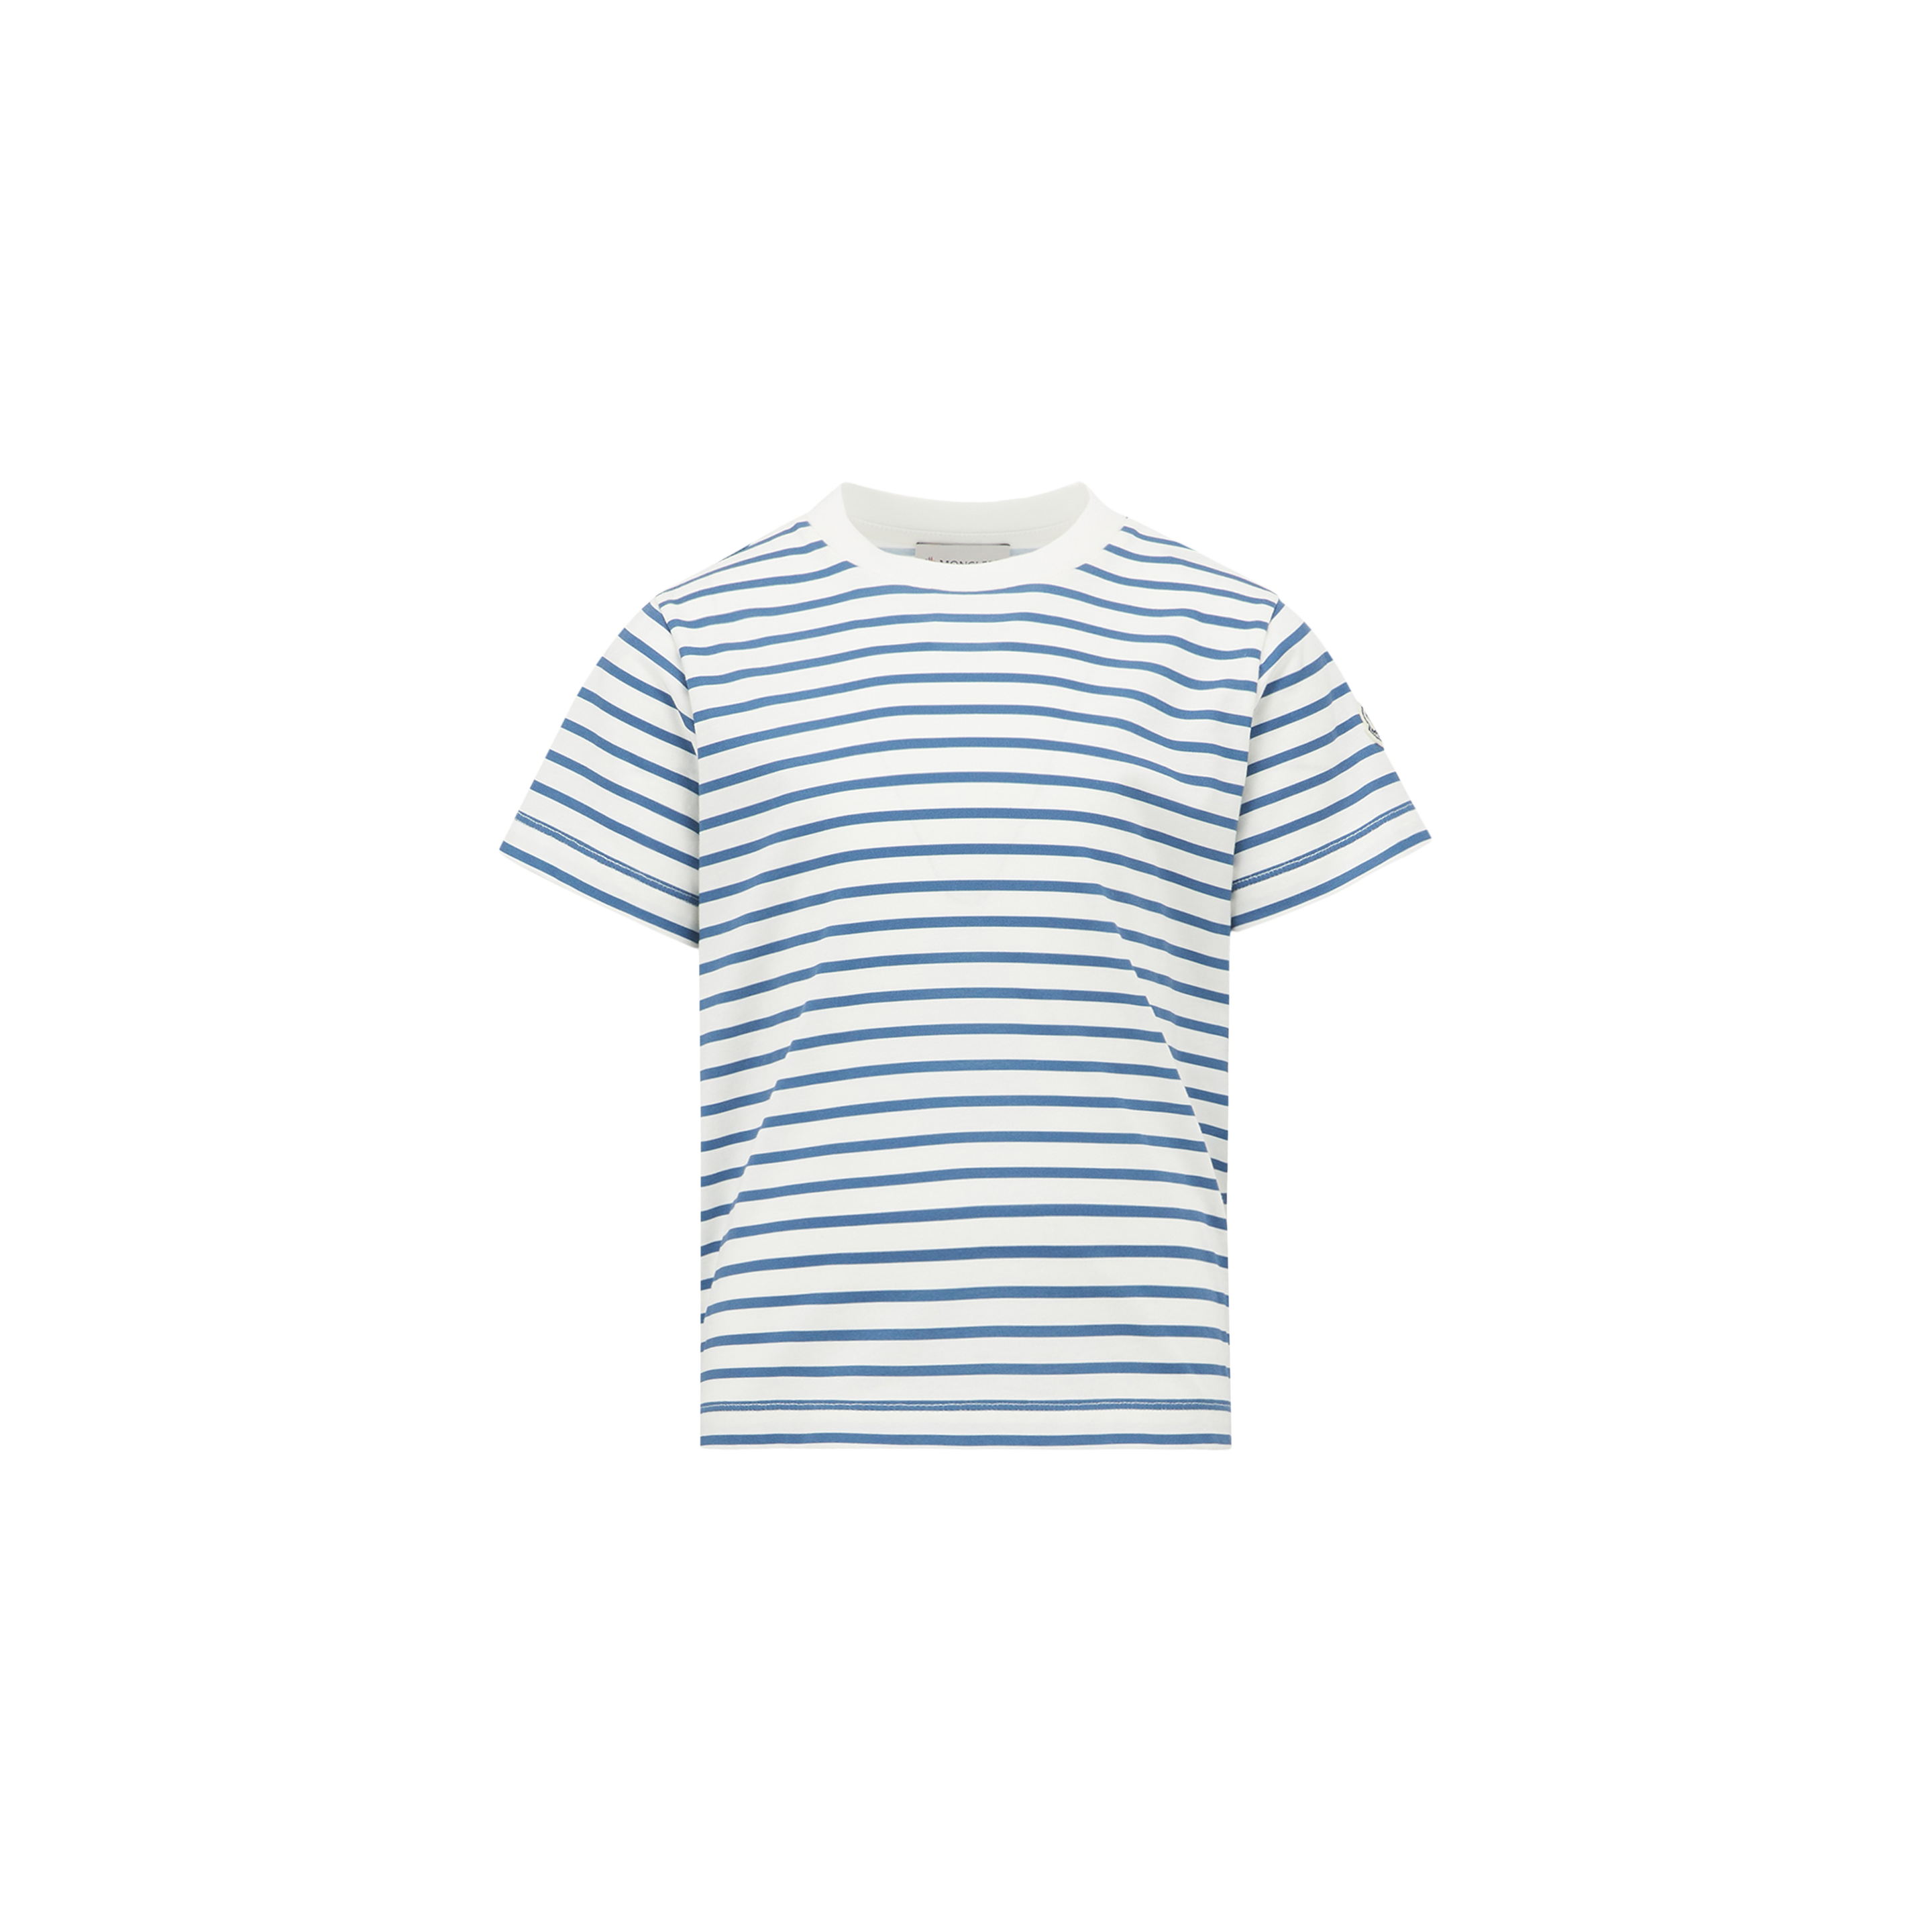 Moncler Kids' Striped T-shirt, Blue, Size: 14y In Multi